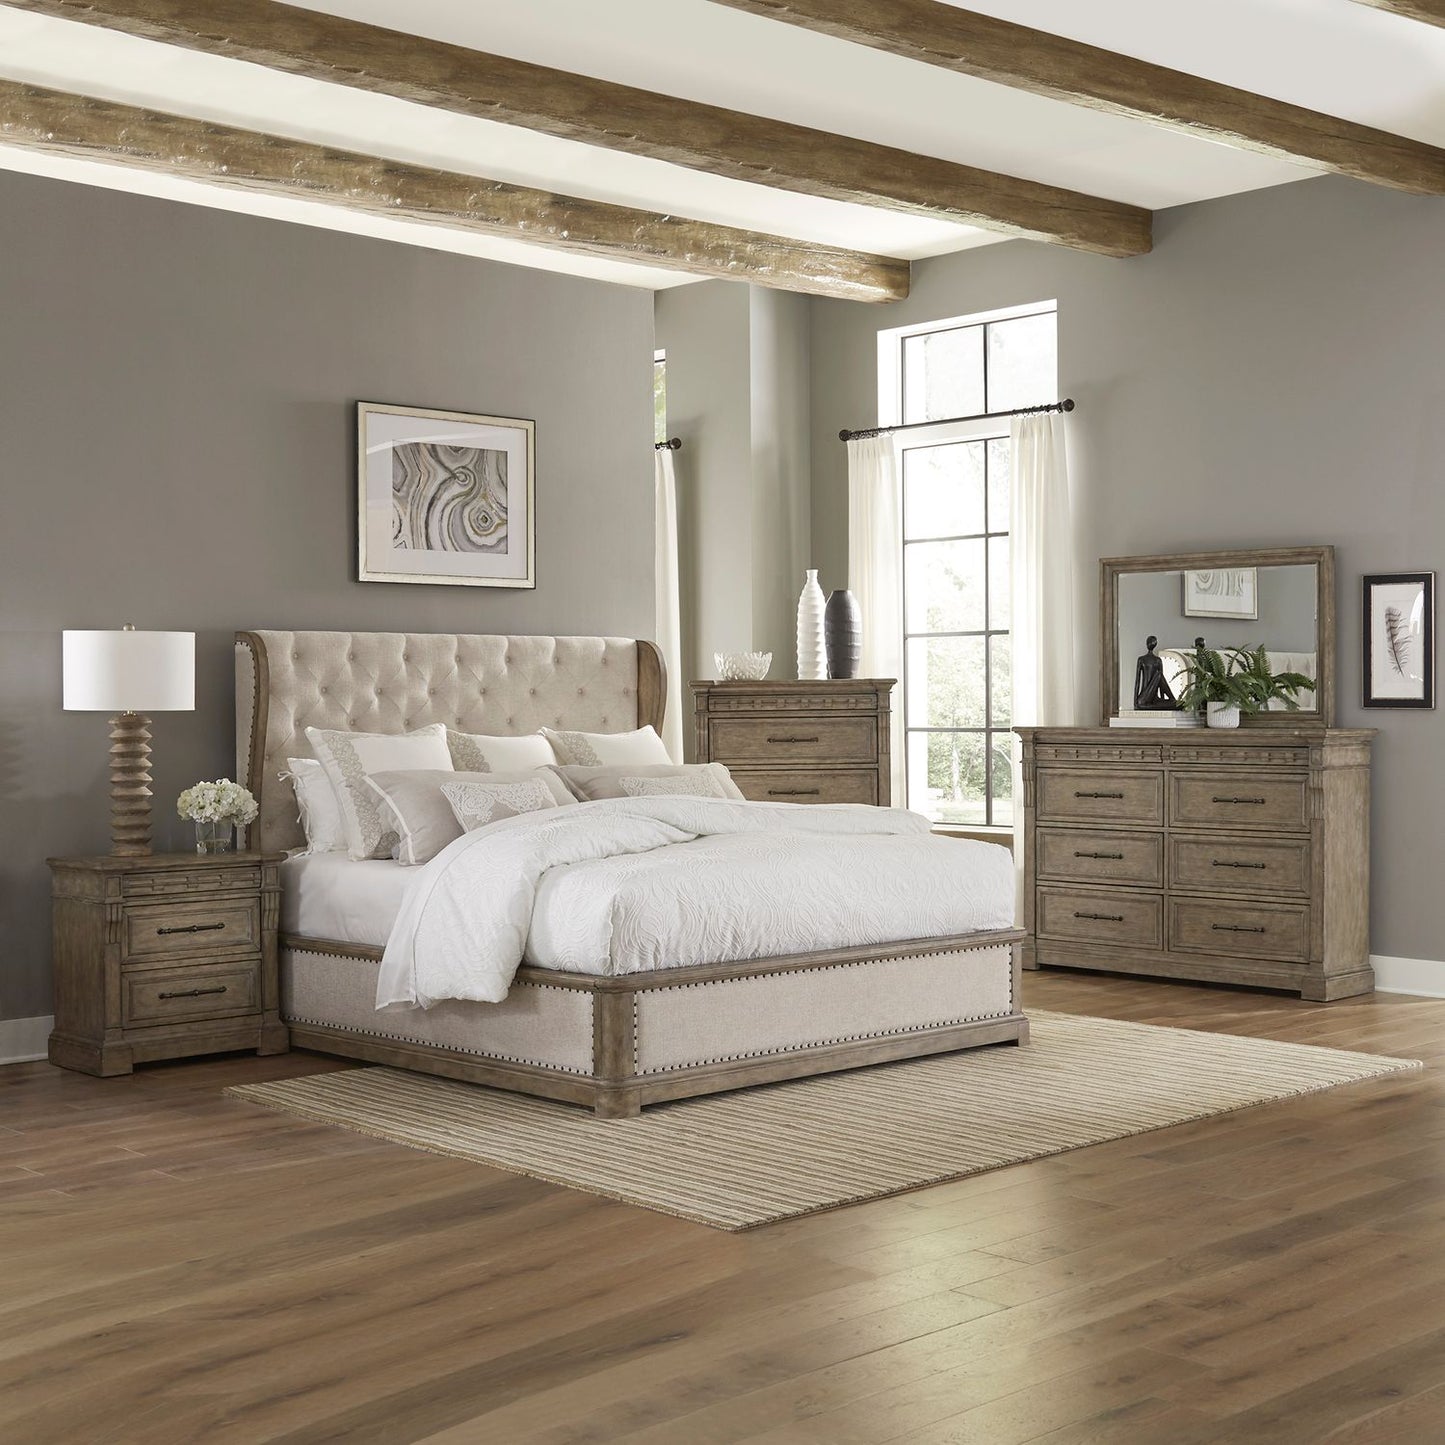 Town & Country - Queen Shelter Bed, Dresser & Mirror, Chest, Night Stand